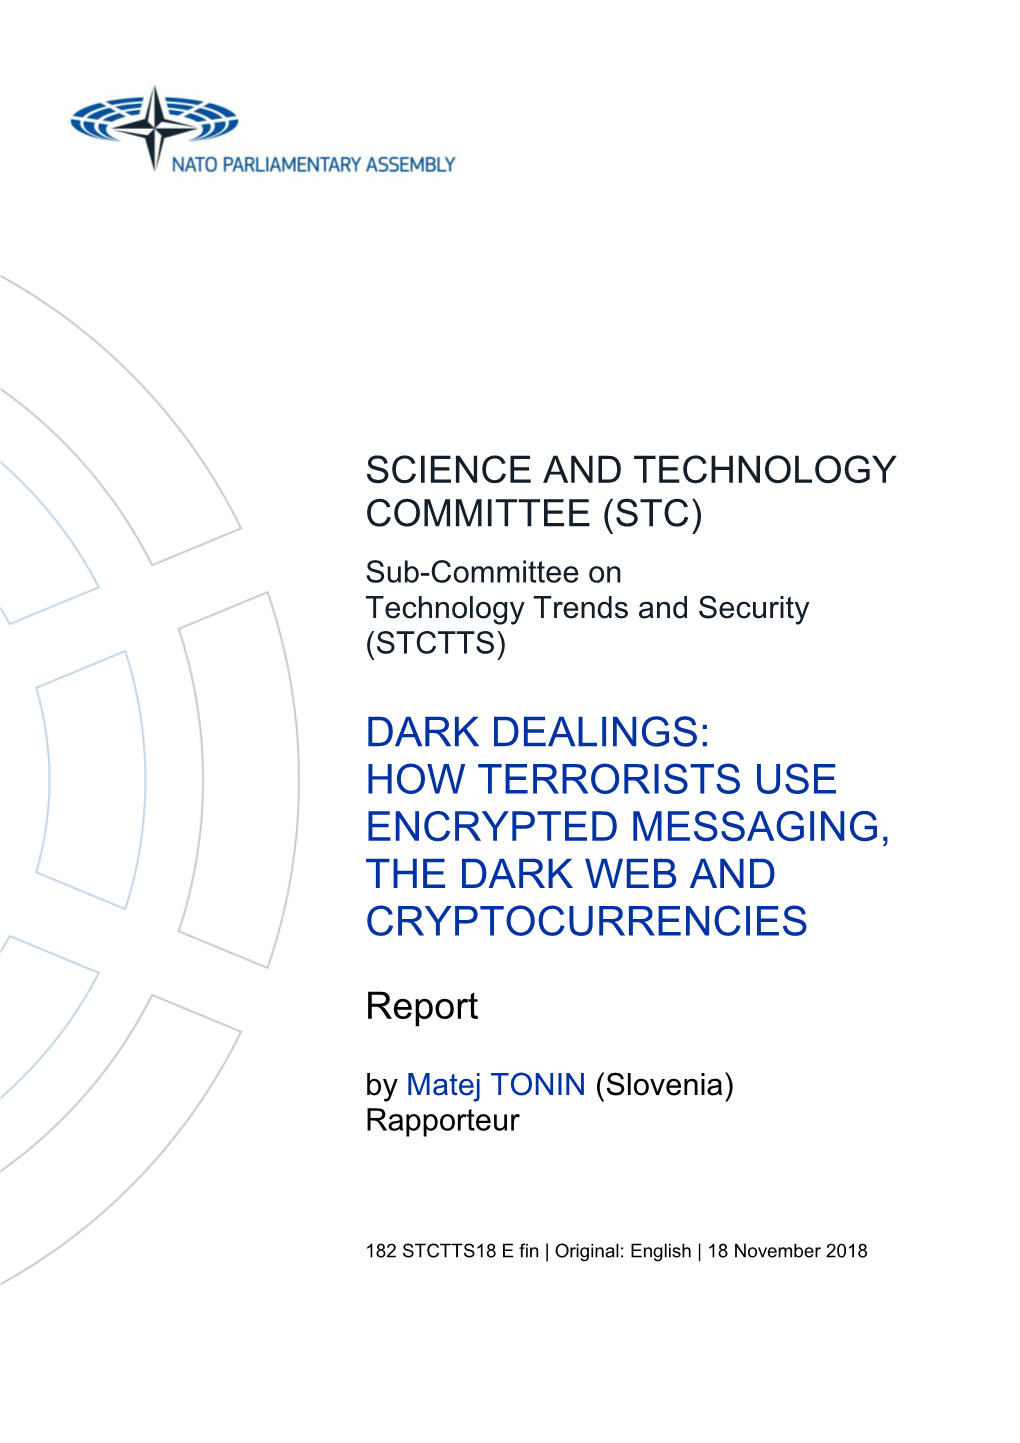 Dark Dealings: How Terrorists Use Encrypted Messaging, the Dark Web and Cryptocurrencies